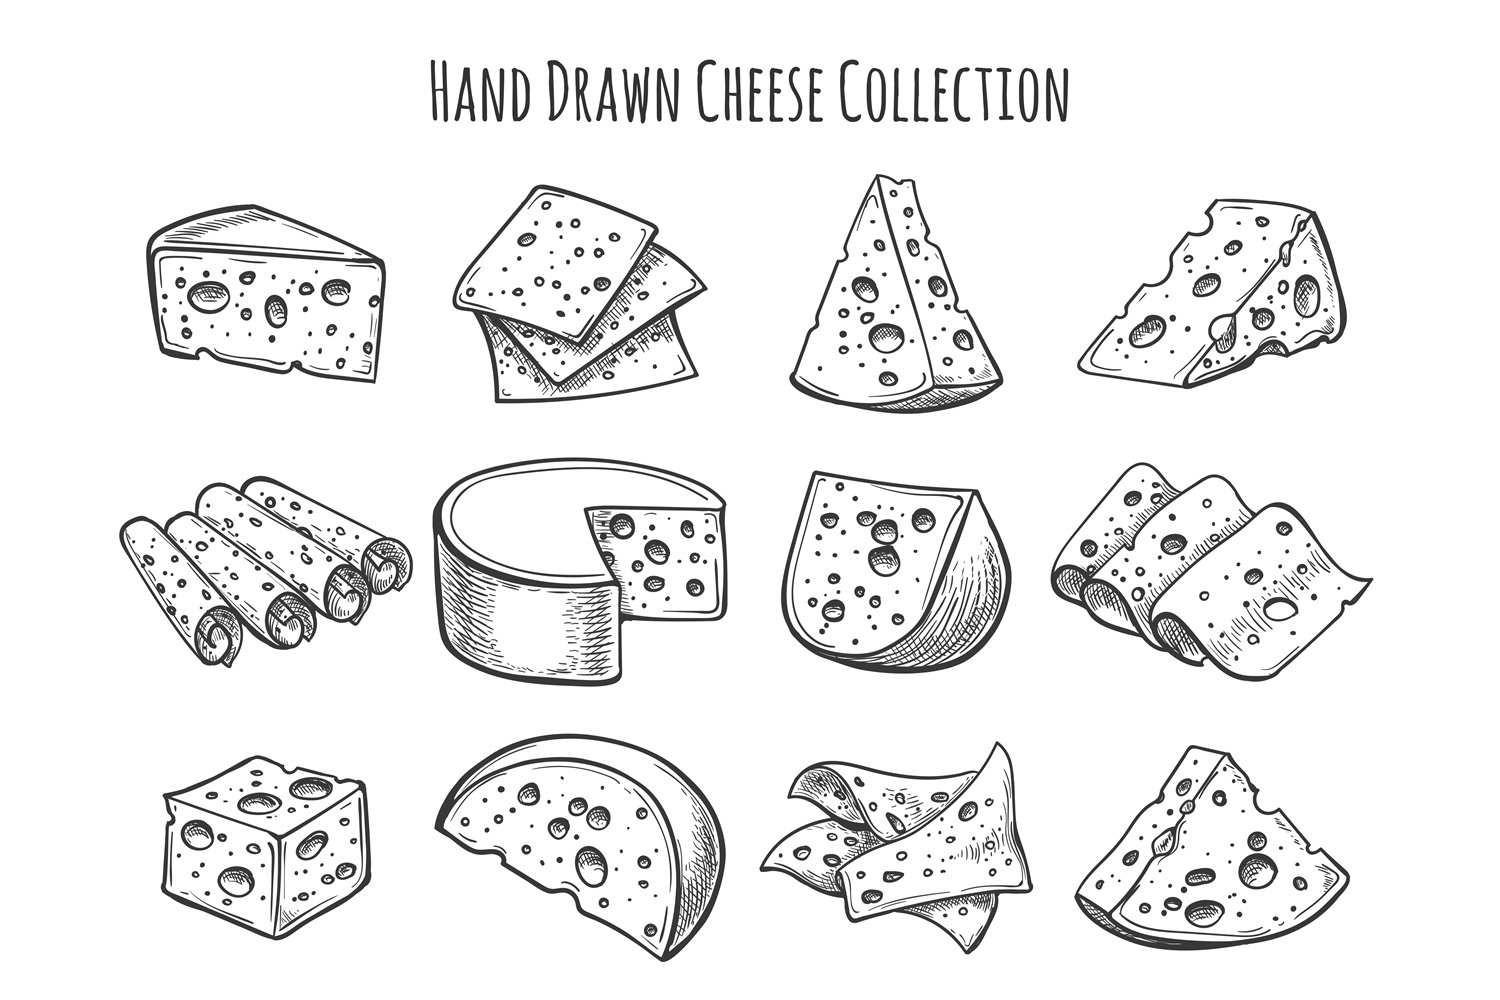 Drawing pencils image slices of cheese.